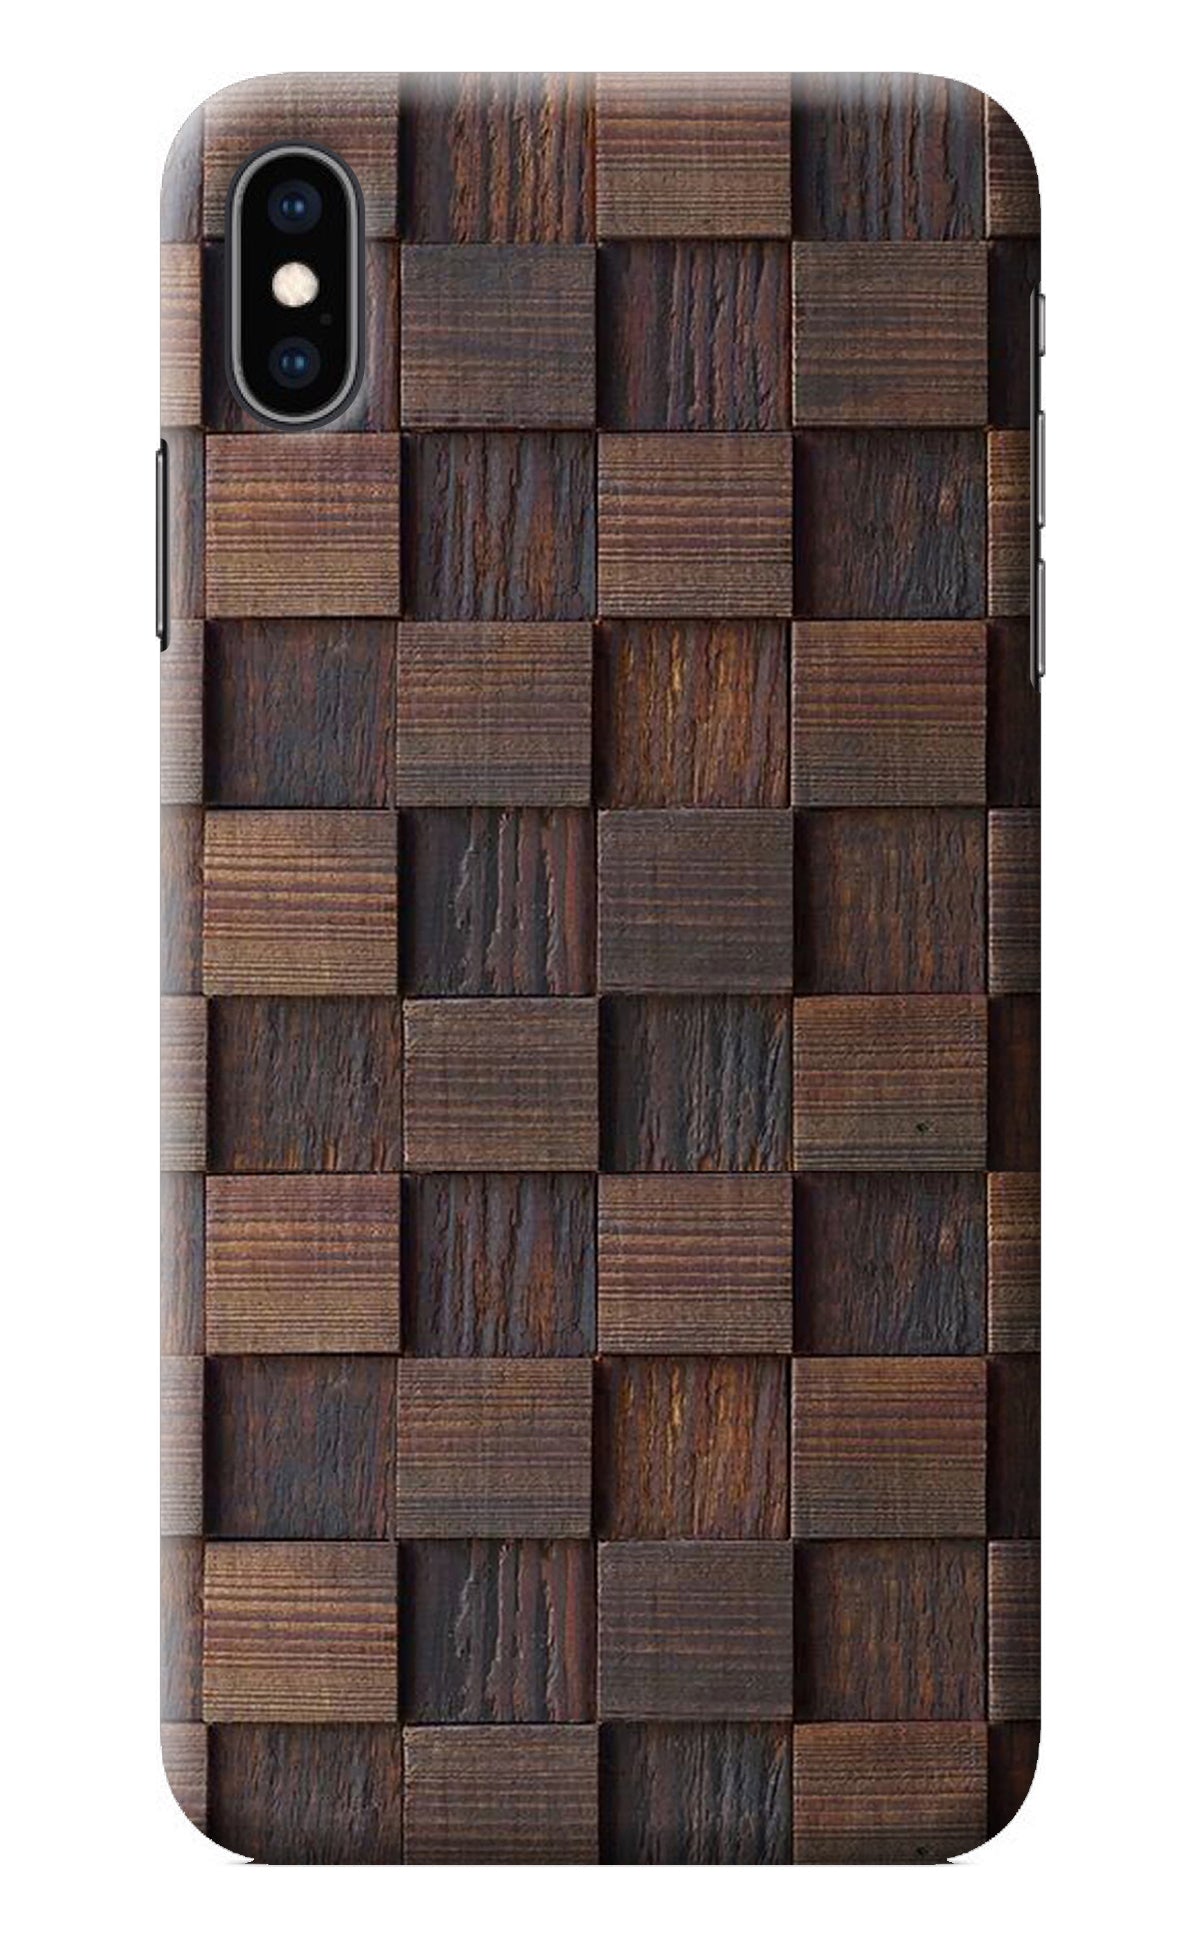 Wooden Cube Design iPhone XS Max Back Cover